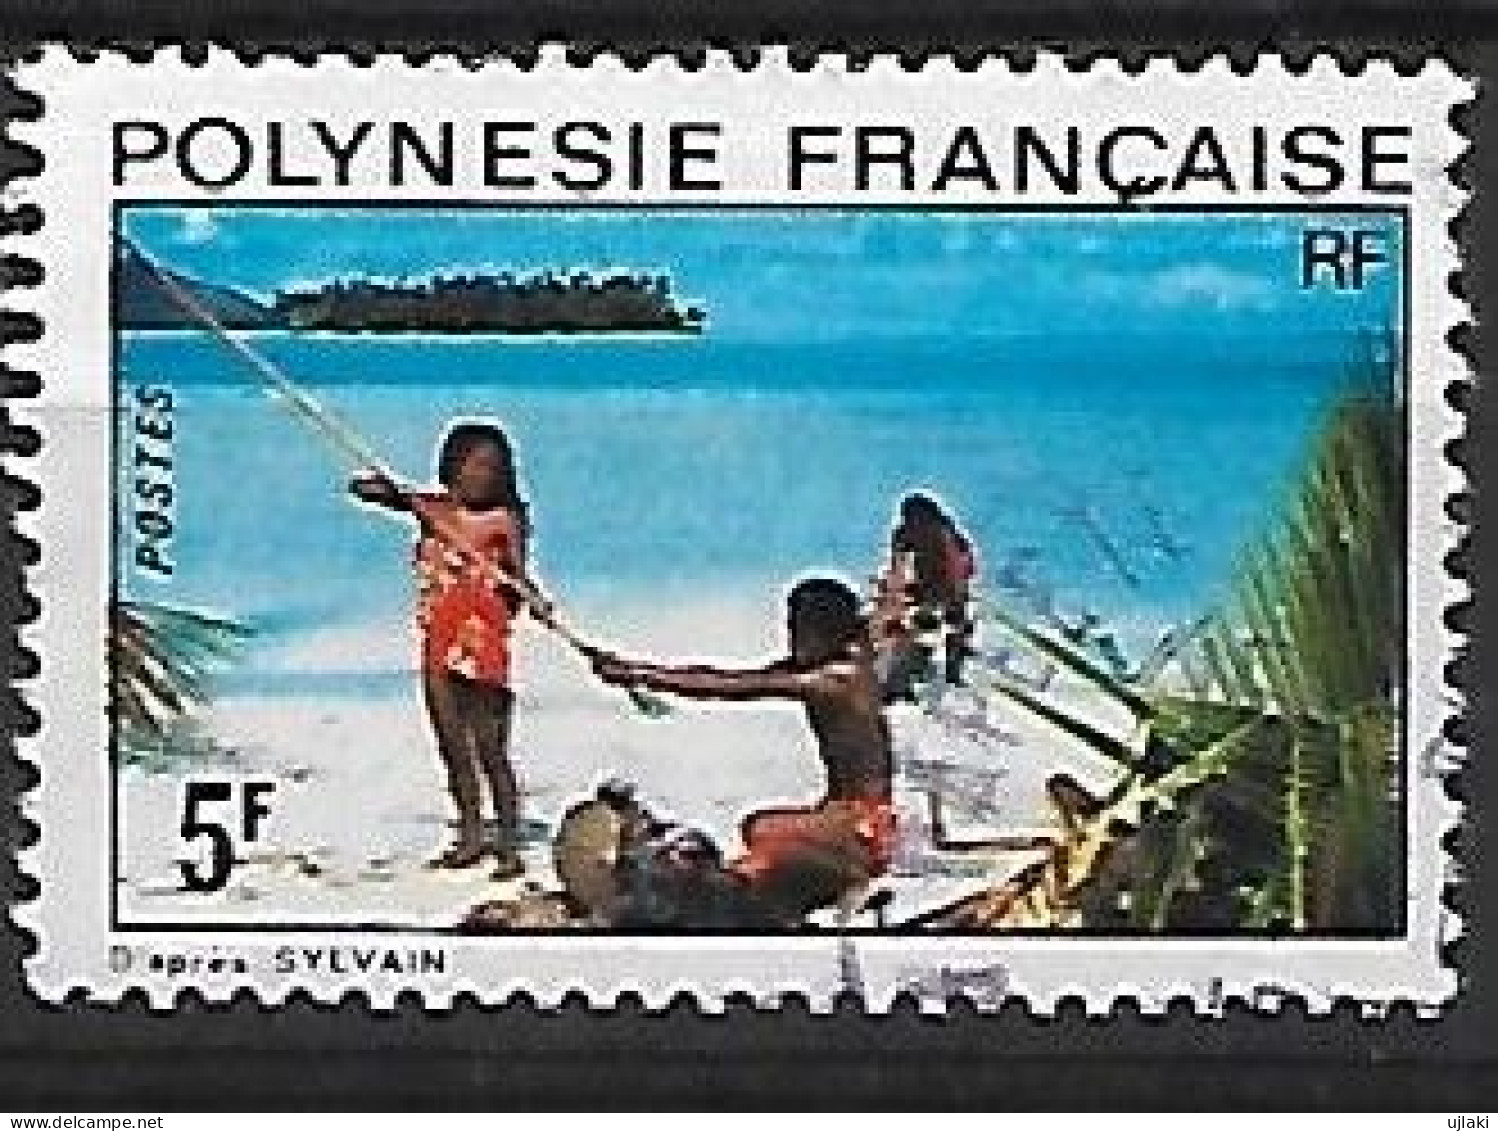 POLYNESIE FRANCAISE: Paysages:Polychrome   N°98  Année:1974 - Used Stamps